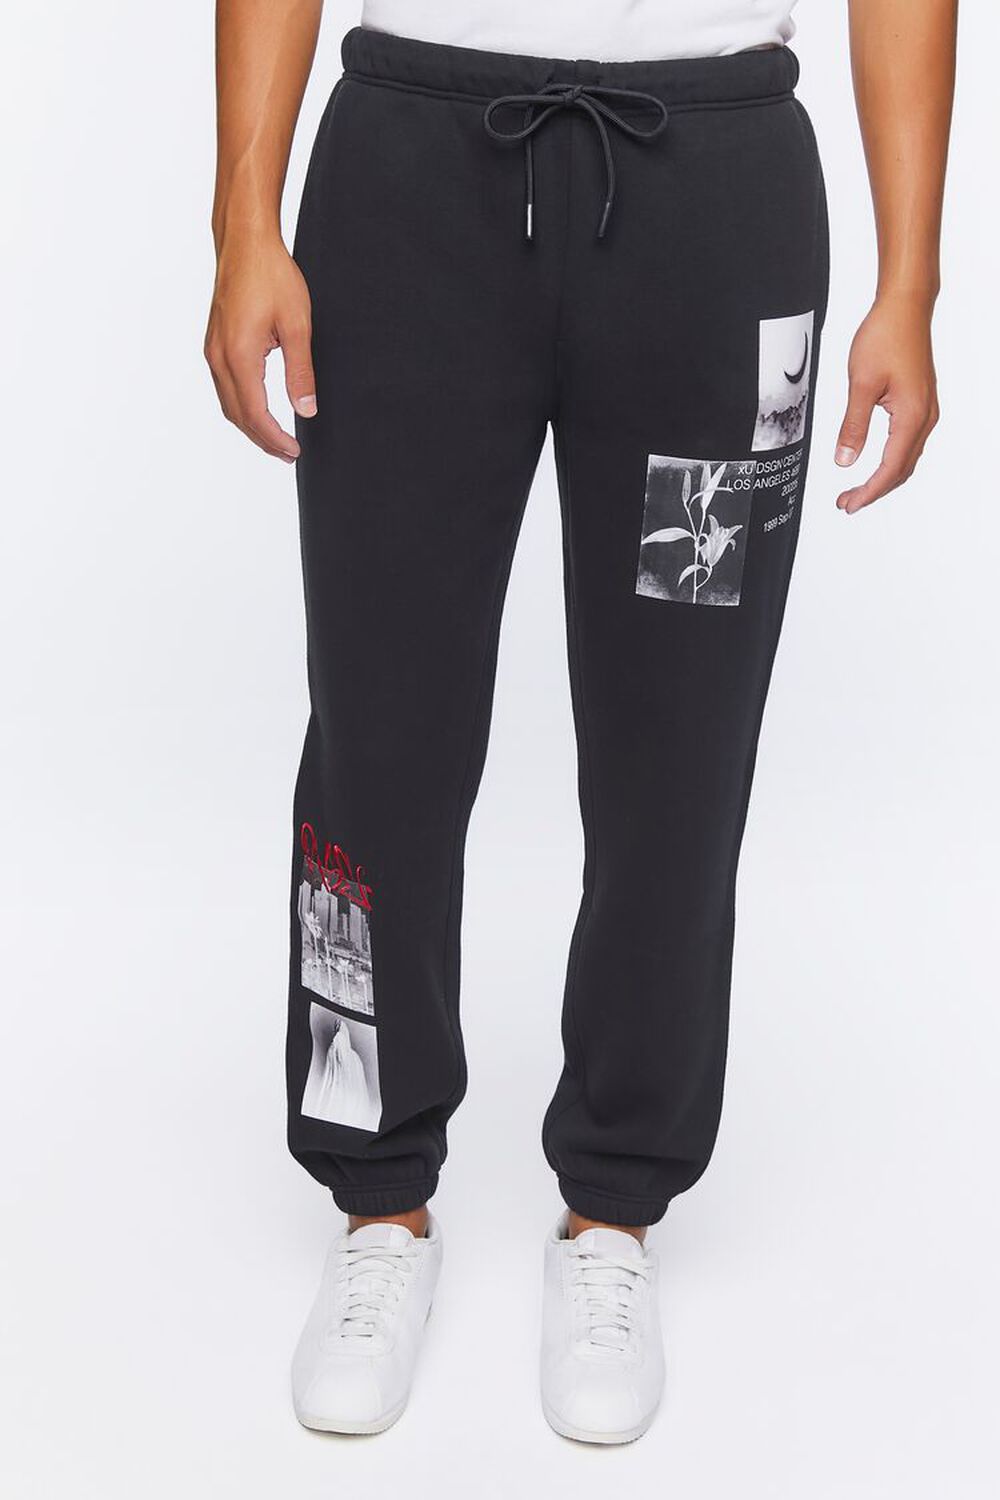 BLACK/MULTI Embroidered Rise Graphic Joggers, image 2